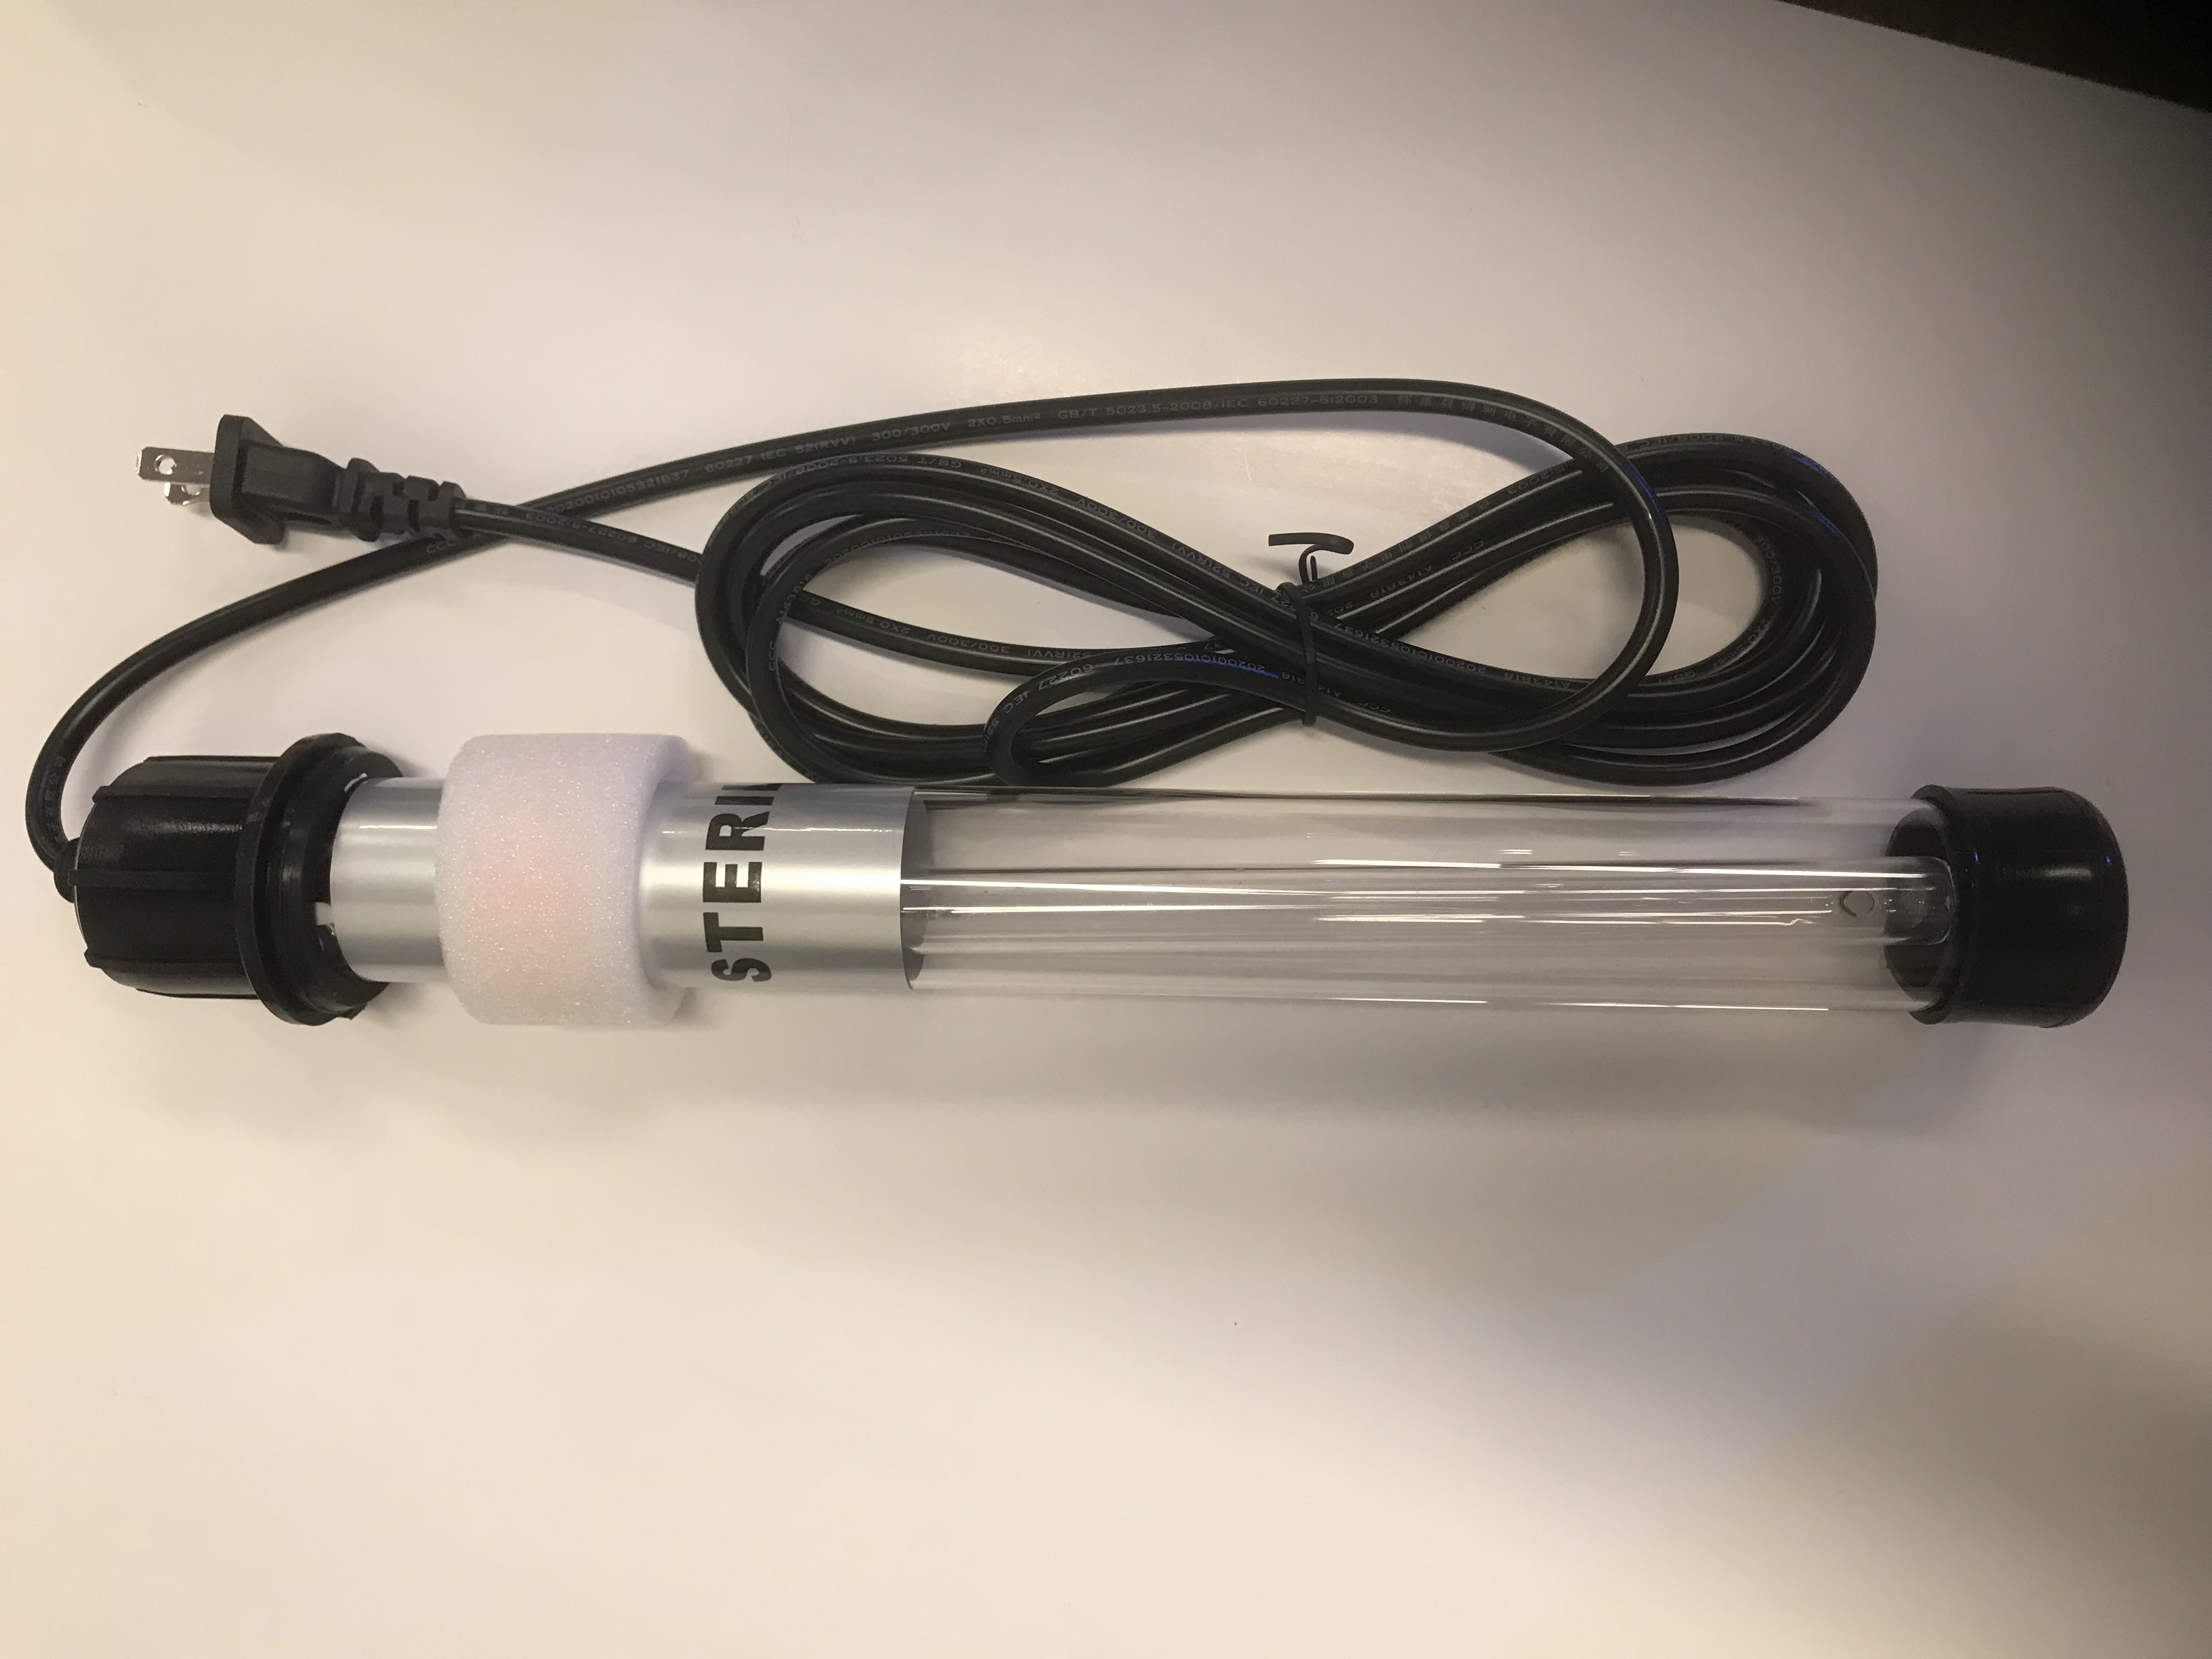 20W Drop In UV Light Submersible *FREE SHIPPING*